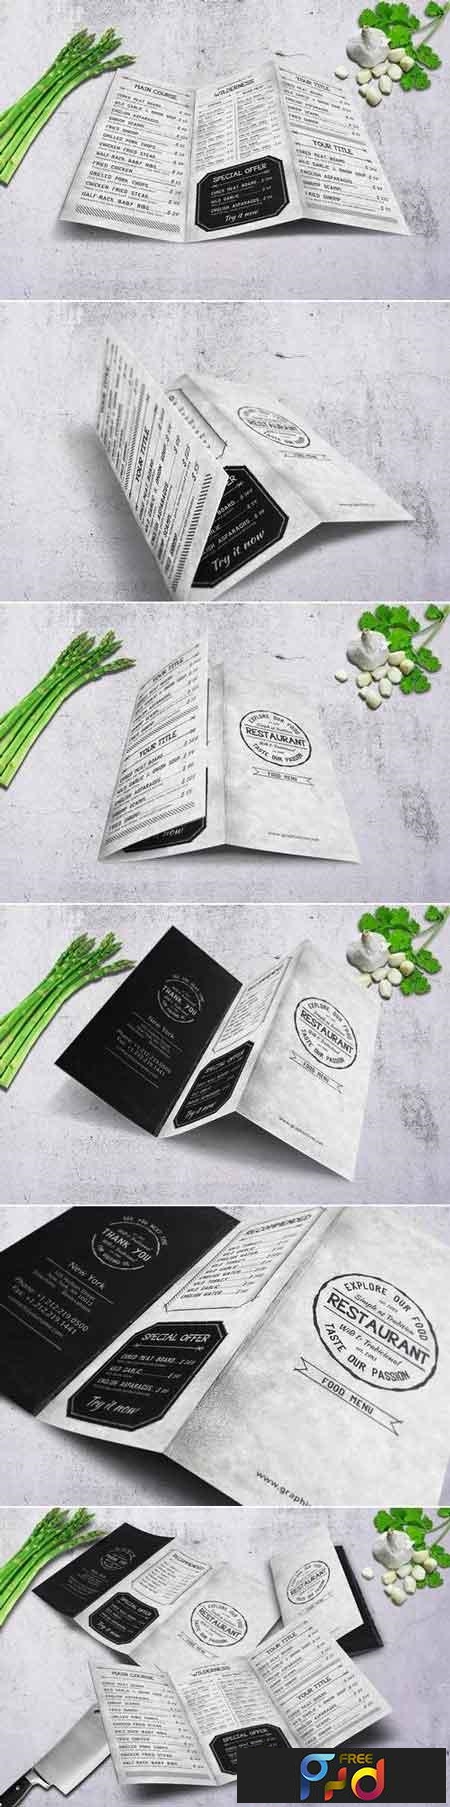 Vintage A4 Trifold Food